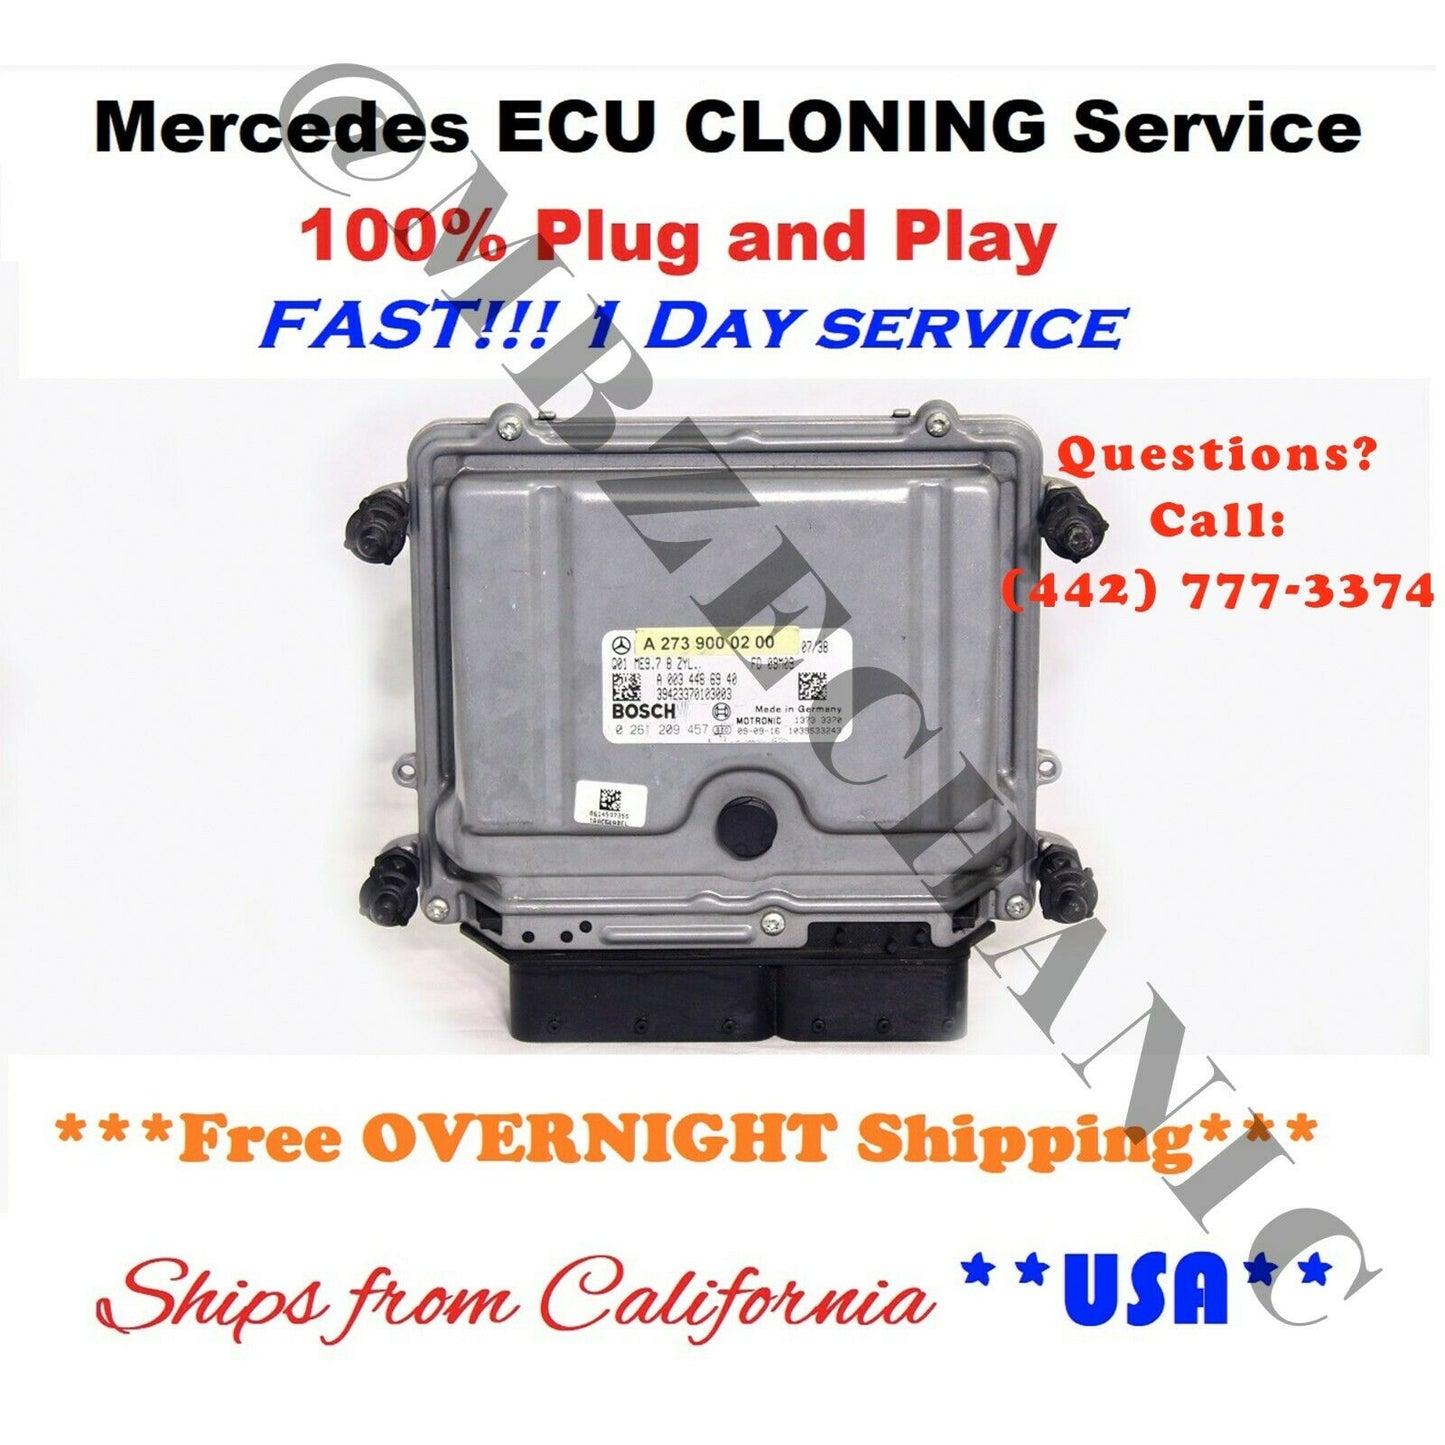 Mercedes S Class 221 ECU Engine Computer CLONING SERVICE Plug and Play